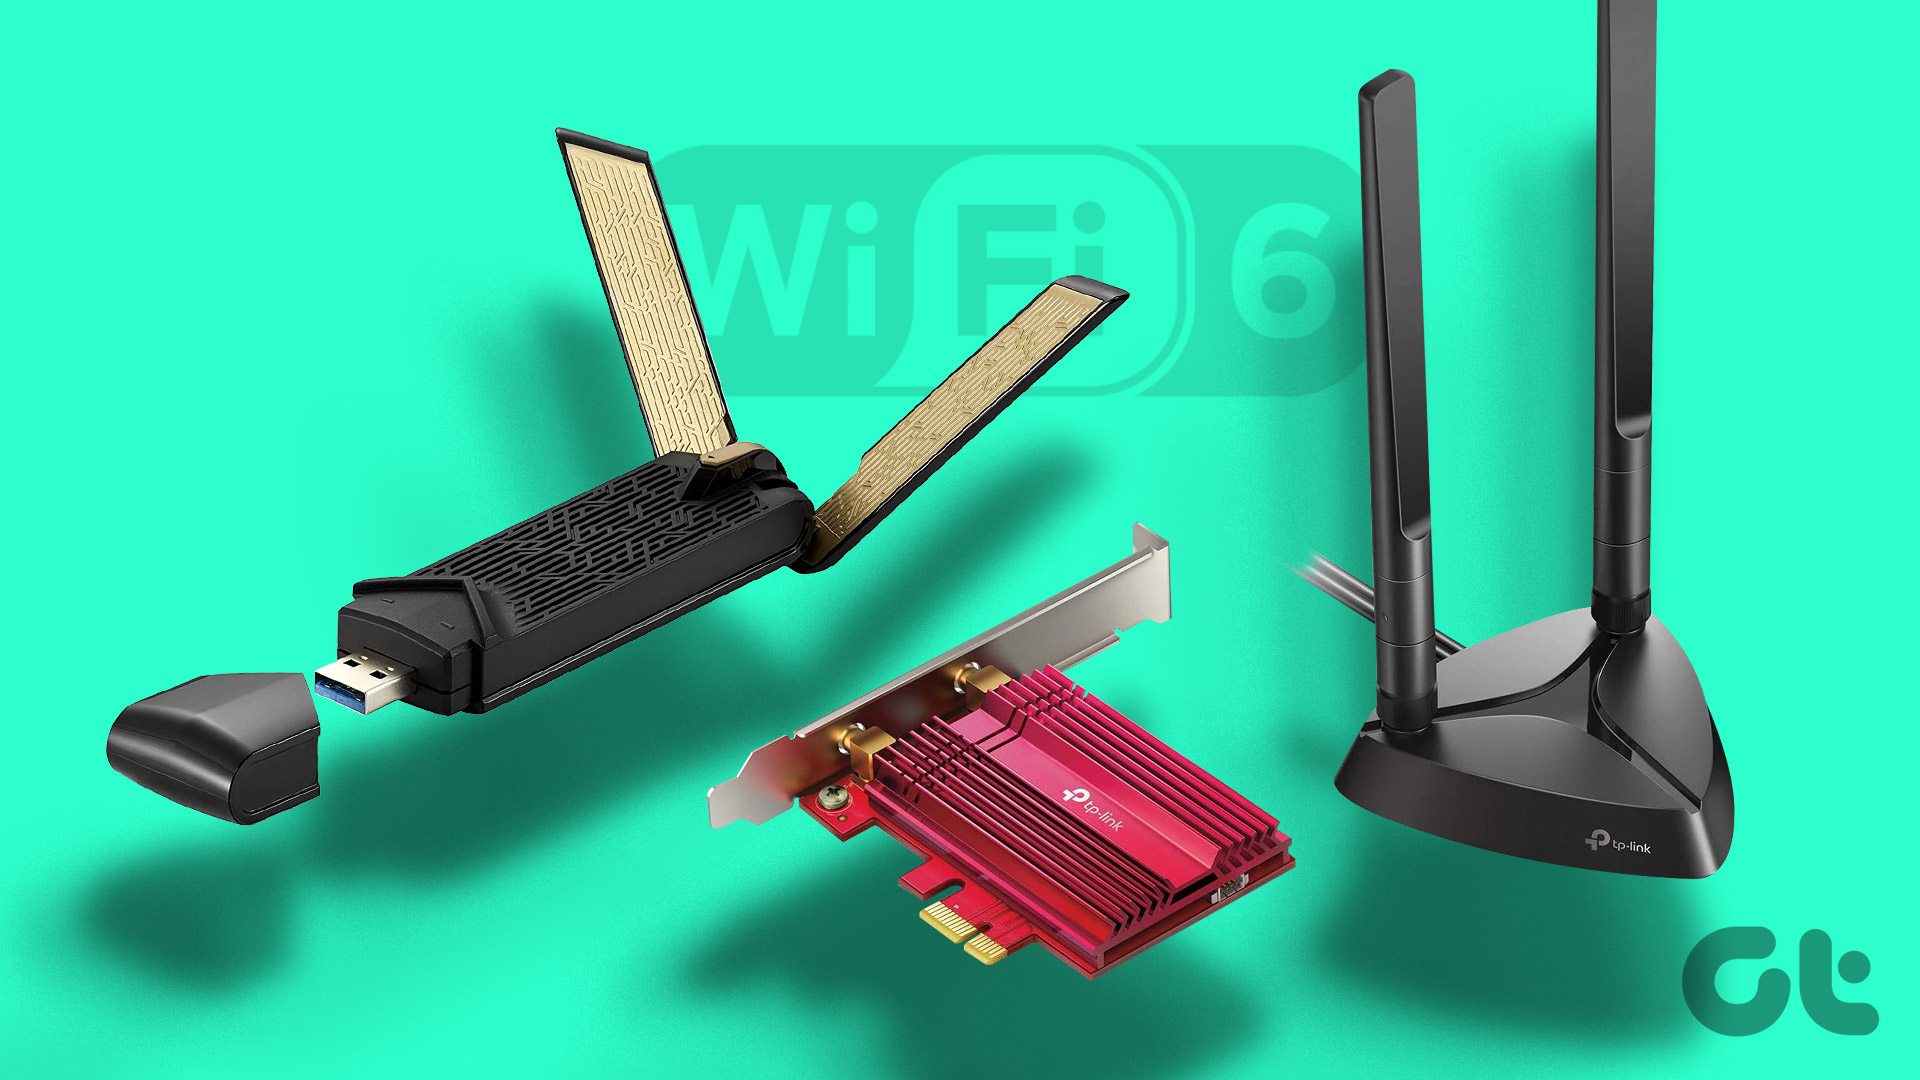 6 Best Wi-Fi 6 Adapters for PC: USB Adapter and Cards